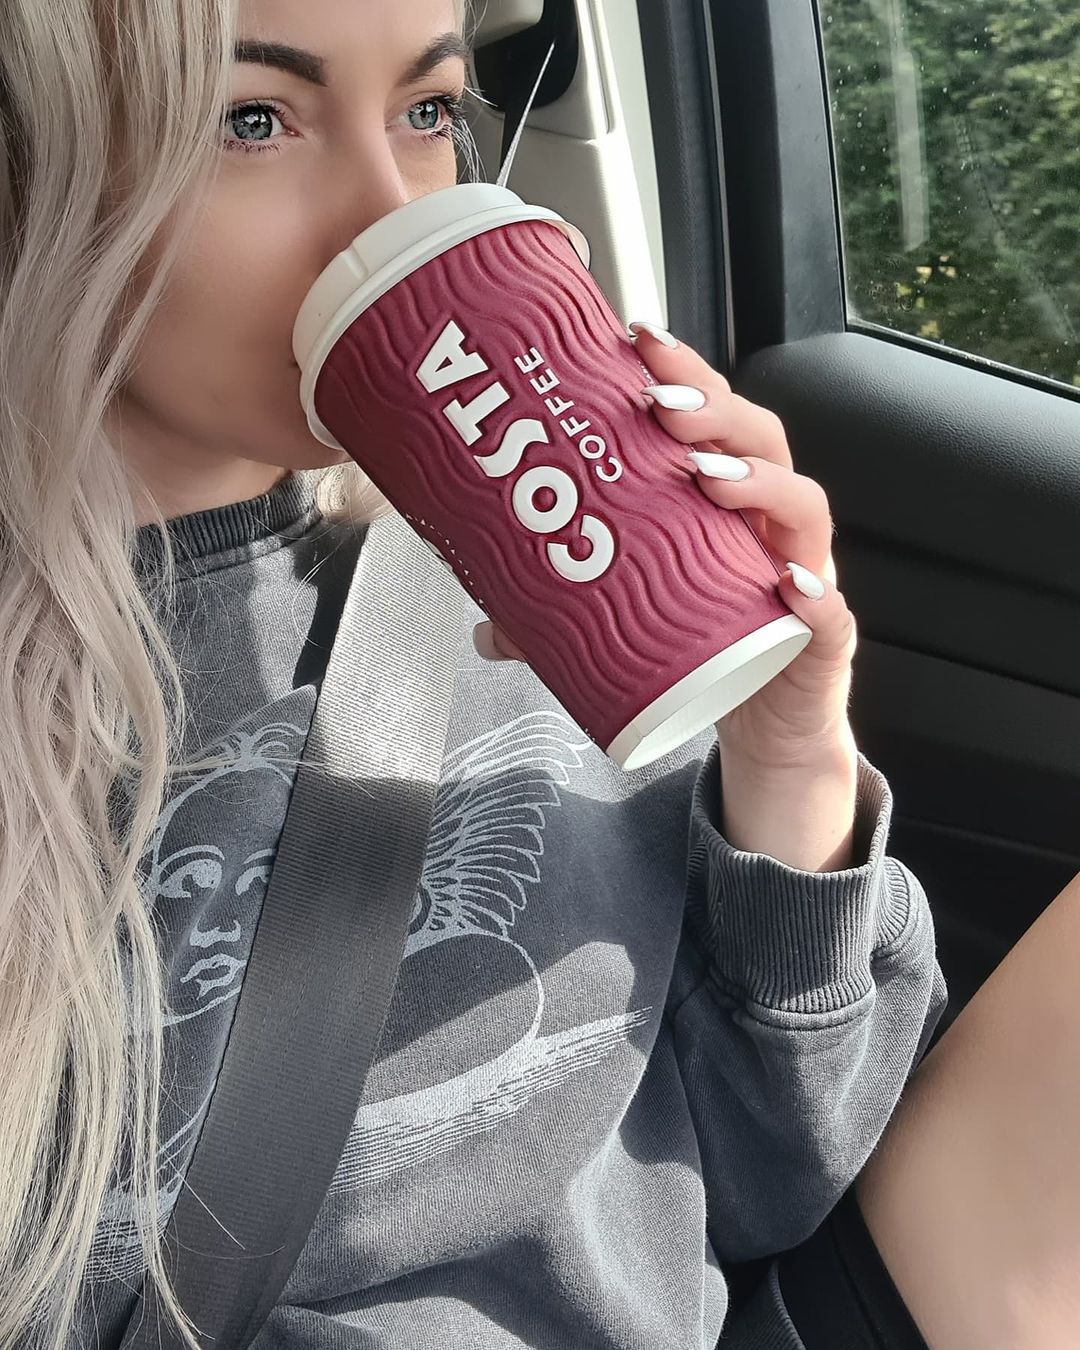 What is your fave type of coffee? I honestly am abit of a coffee hoe & will just 1